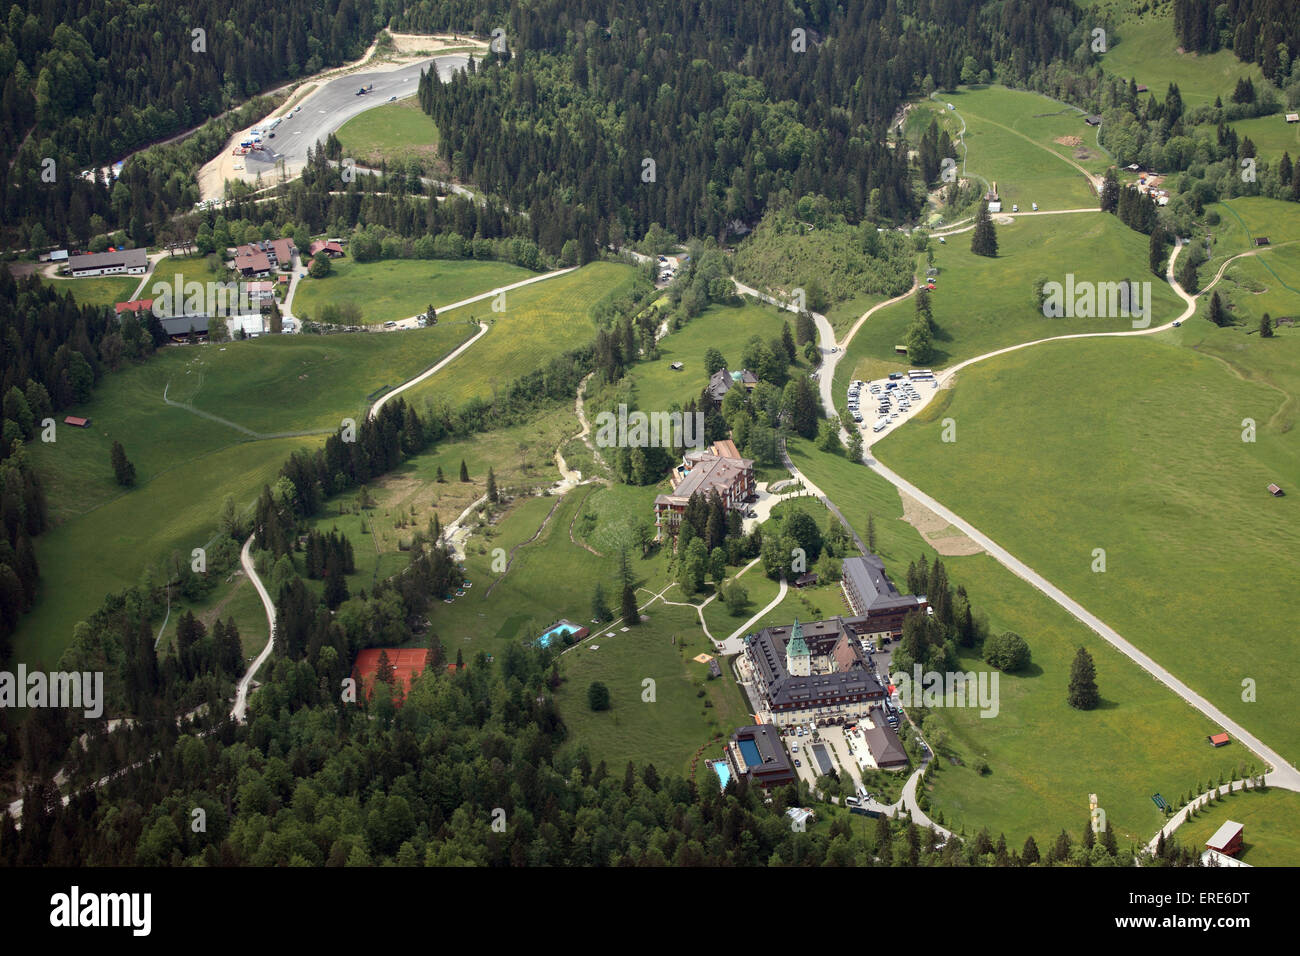 An aerial view shows the site of Schloss Elmau near Garmisch-Partenkirchen. The hotel facilities can be seen to the right in the foreground. In the center is the new construction with luxury suites where the top politicians will sleep and meet for conferences. The hotel is providing around 150 rooms and suites. In the background to the left is the new helicopter landing pad. State and government leaders from the G7 countries are meeting here on 07 and 08 June. Photo: LUFTBILD BERTRAM/dpa Stock Photo